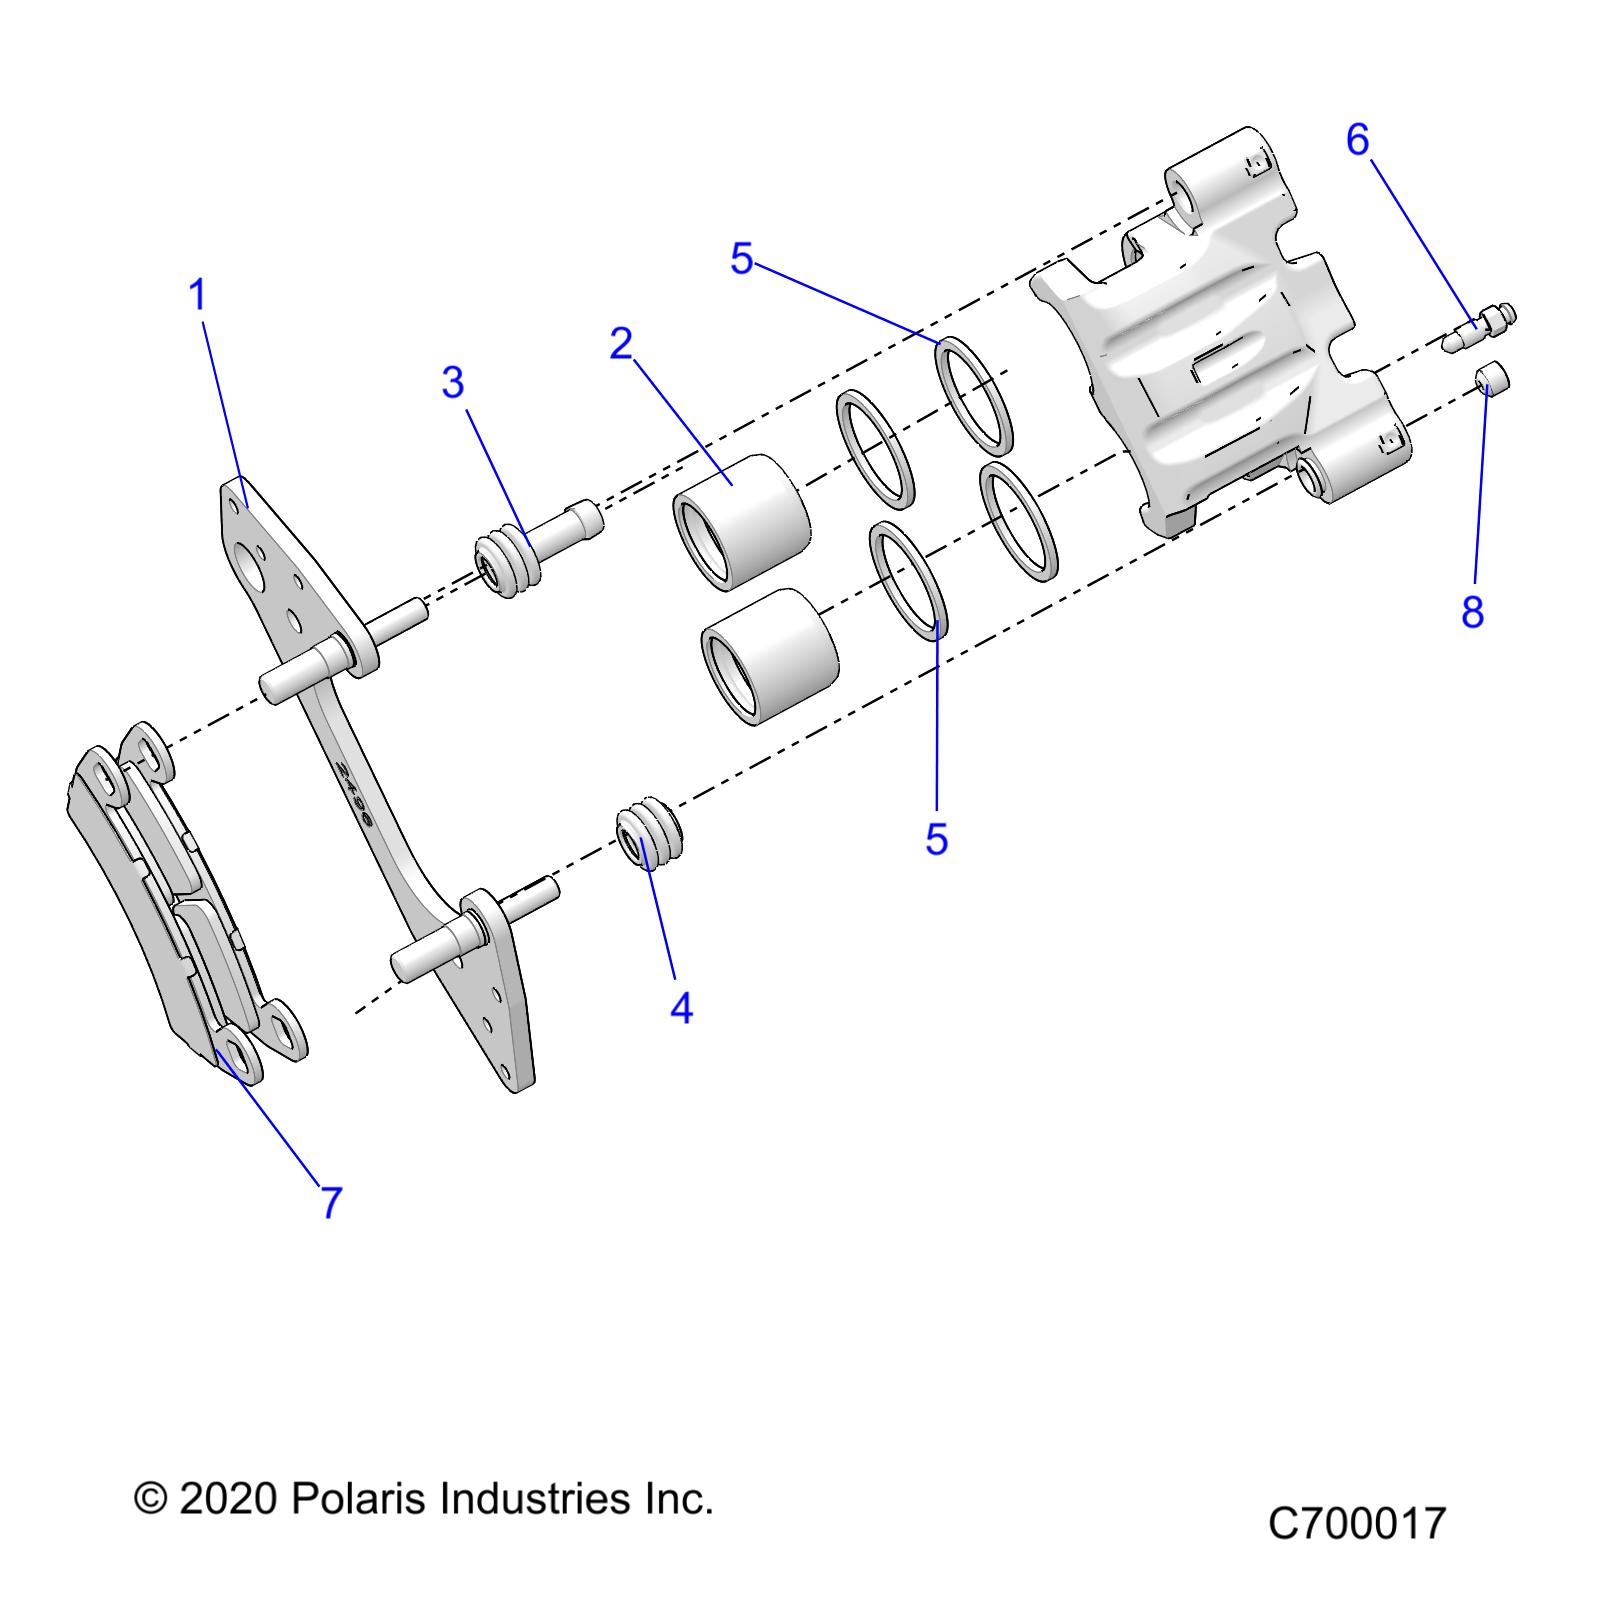 Part Number : 1912256 RIGHT HAND DOUBLE BORE BRAKE C